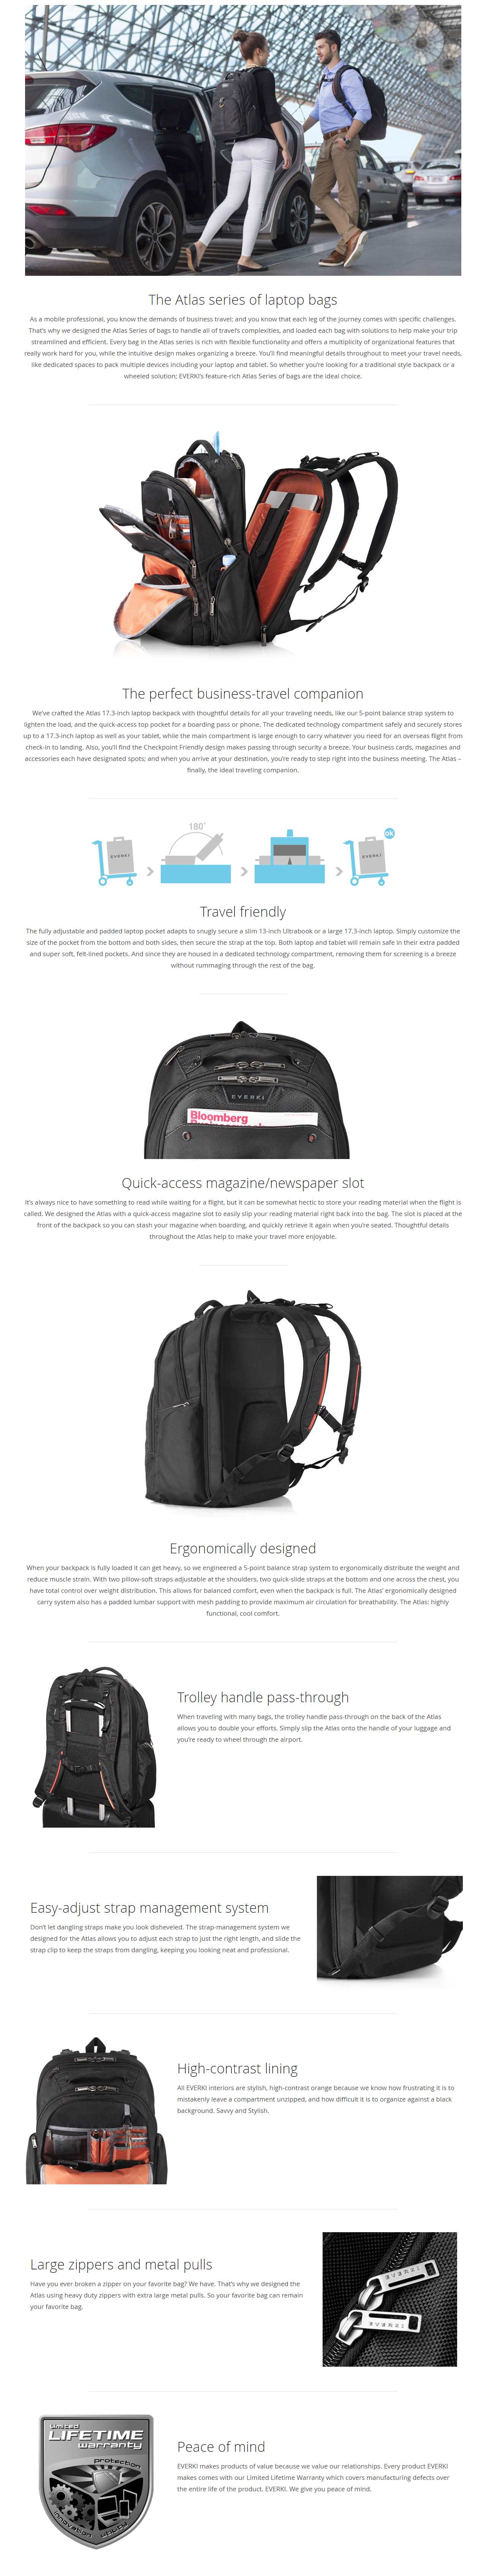 A large marketing image providing additional information about the product Everki 13" To 17.3" Atlas Checkpoint Friendly Backpack - Additional alt info not provided